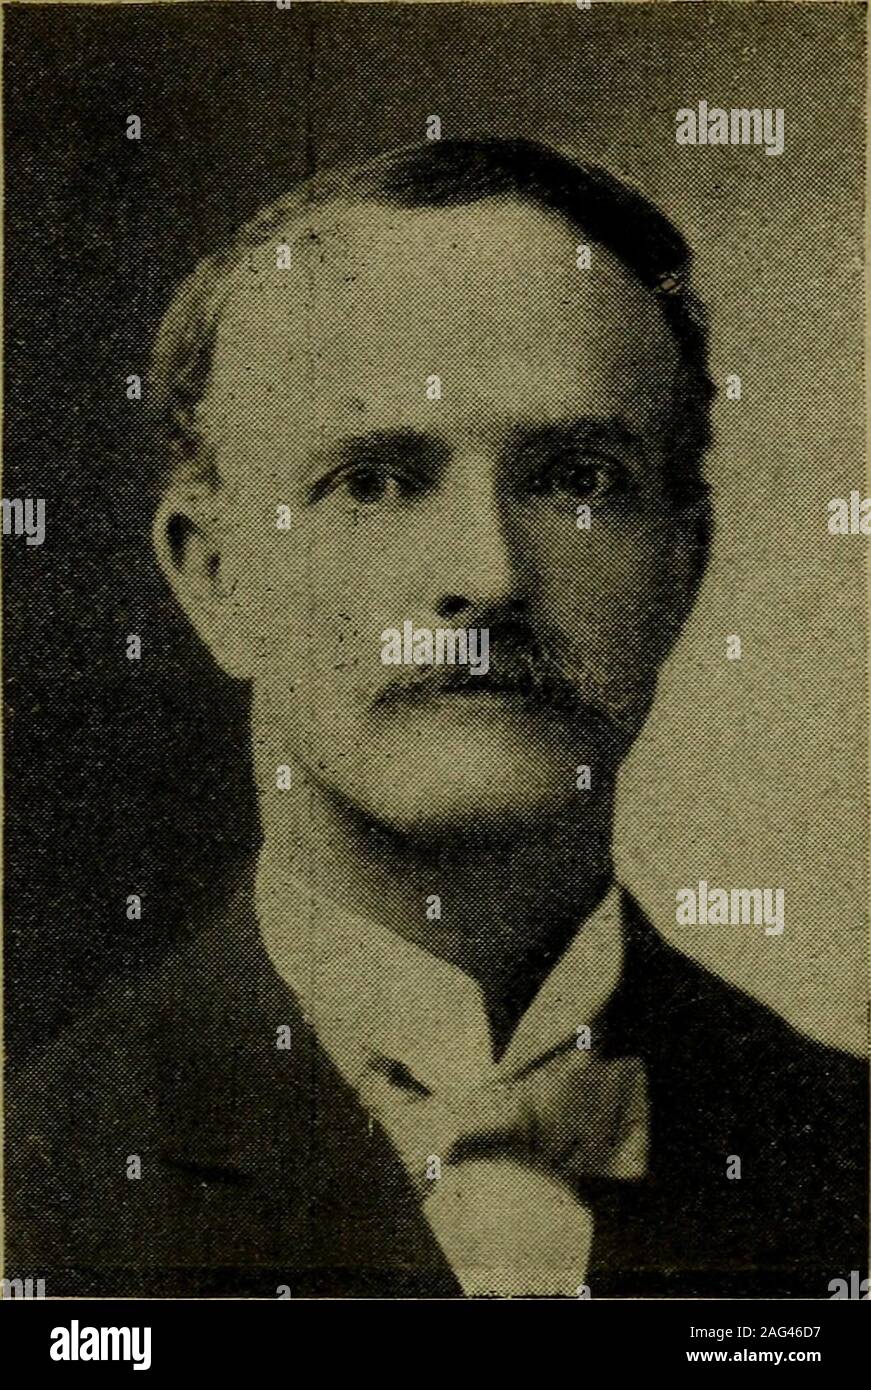 . Who's who in state politics. DAY, DANIEL P., 8th Middlesex, Rep.,Hopkinton. Born Worcester, Aug. 20, 1867;public schools. Clothing and shoe dealer;local representative Boston GlObe. A. F. A.M. (P. M.), 1. O. O. F. (P. N, G.), A. O. U.W. Town treasurer past 6 years; Rep. towncommittee (sec. and treas.). House 11, banks and banking. 142. DEAN, CHARLES A., 21st Middlesex,Dem., Wakefield. Born England: publicschools. Rattan business, farming. I. O.O. P. Assessor, finance and sewer commit-tee, sec. public library, pres. board of trade;House 1893-99-00-1901-02-03-,06-07-08-,10,committees on taxati Stock Photo